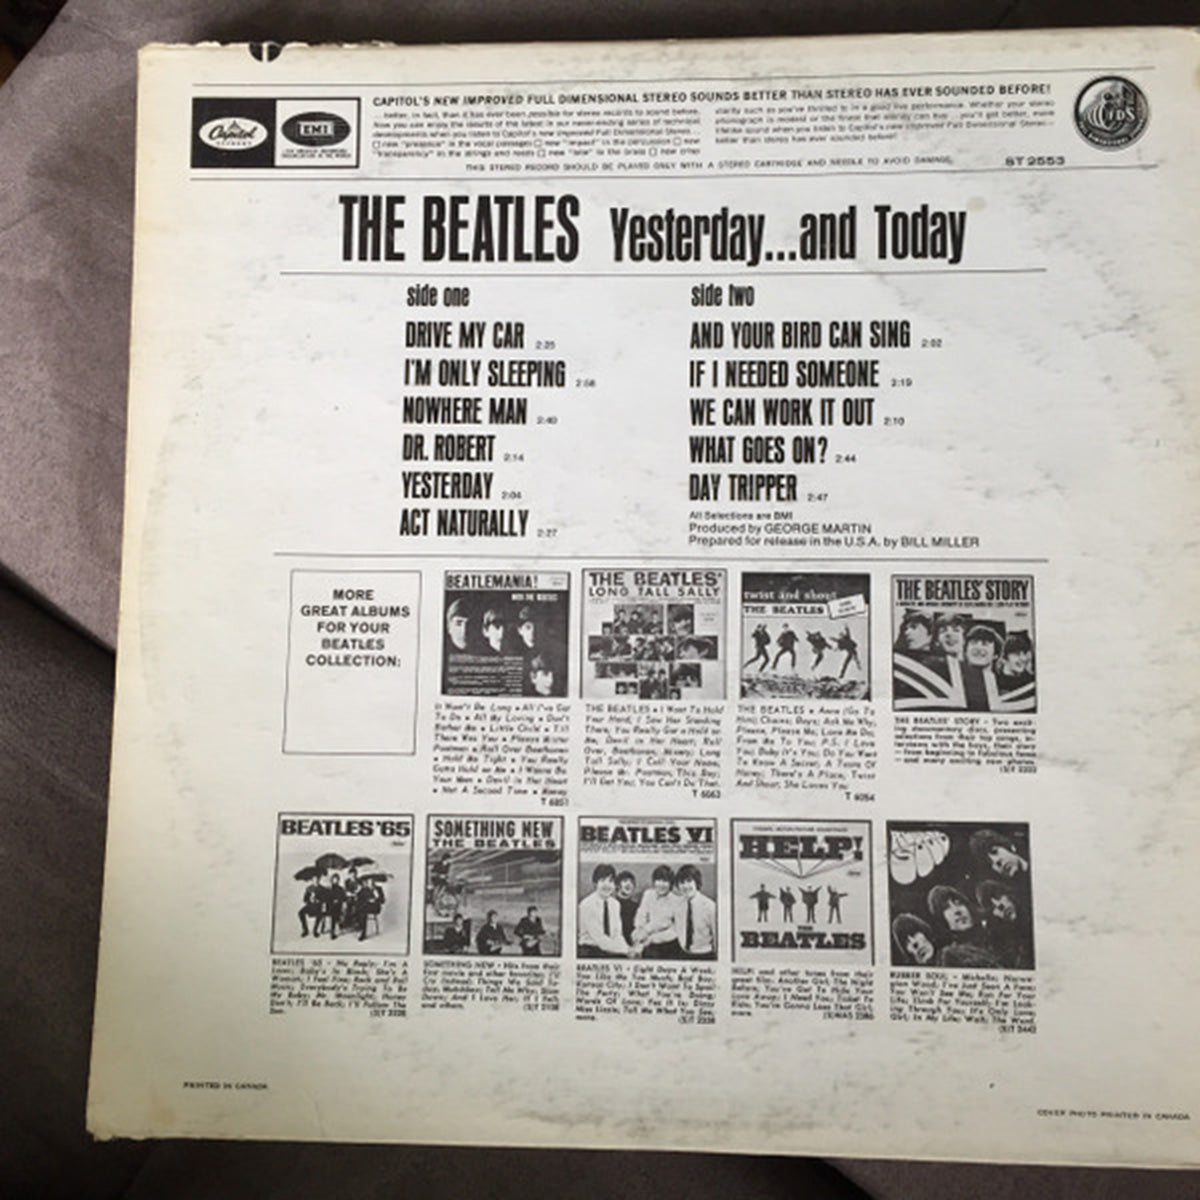 The Beatles – Yesterday And Today - 1966